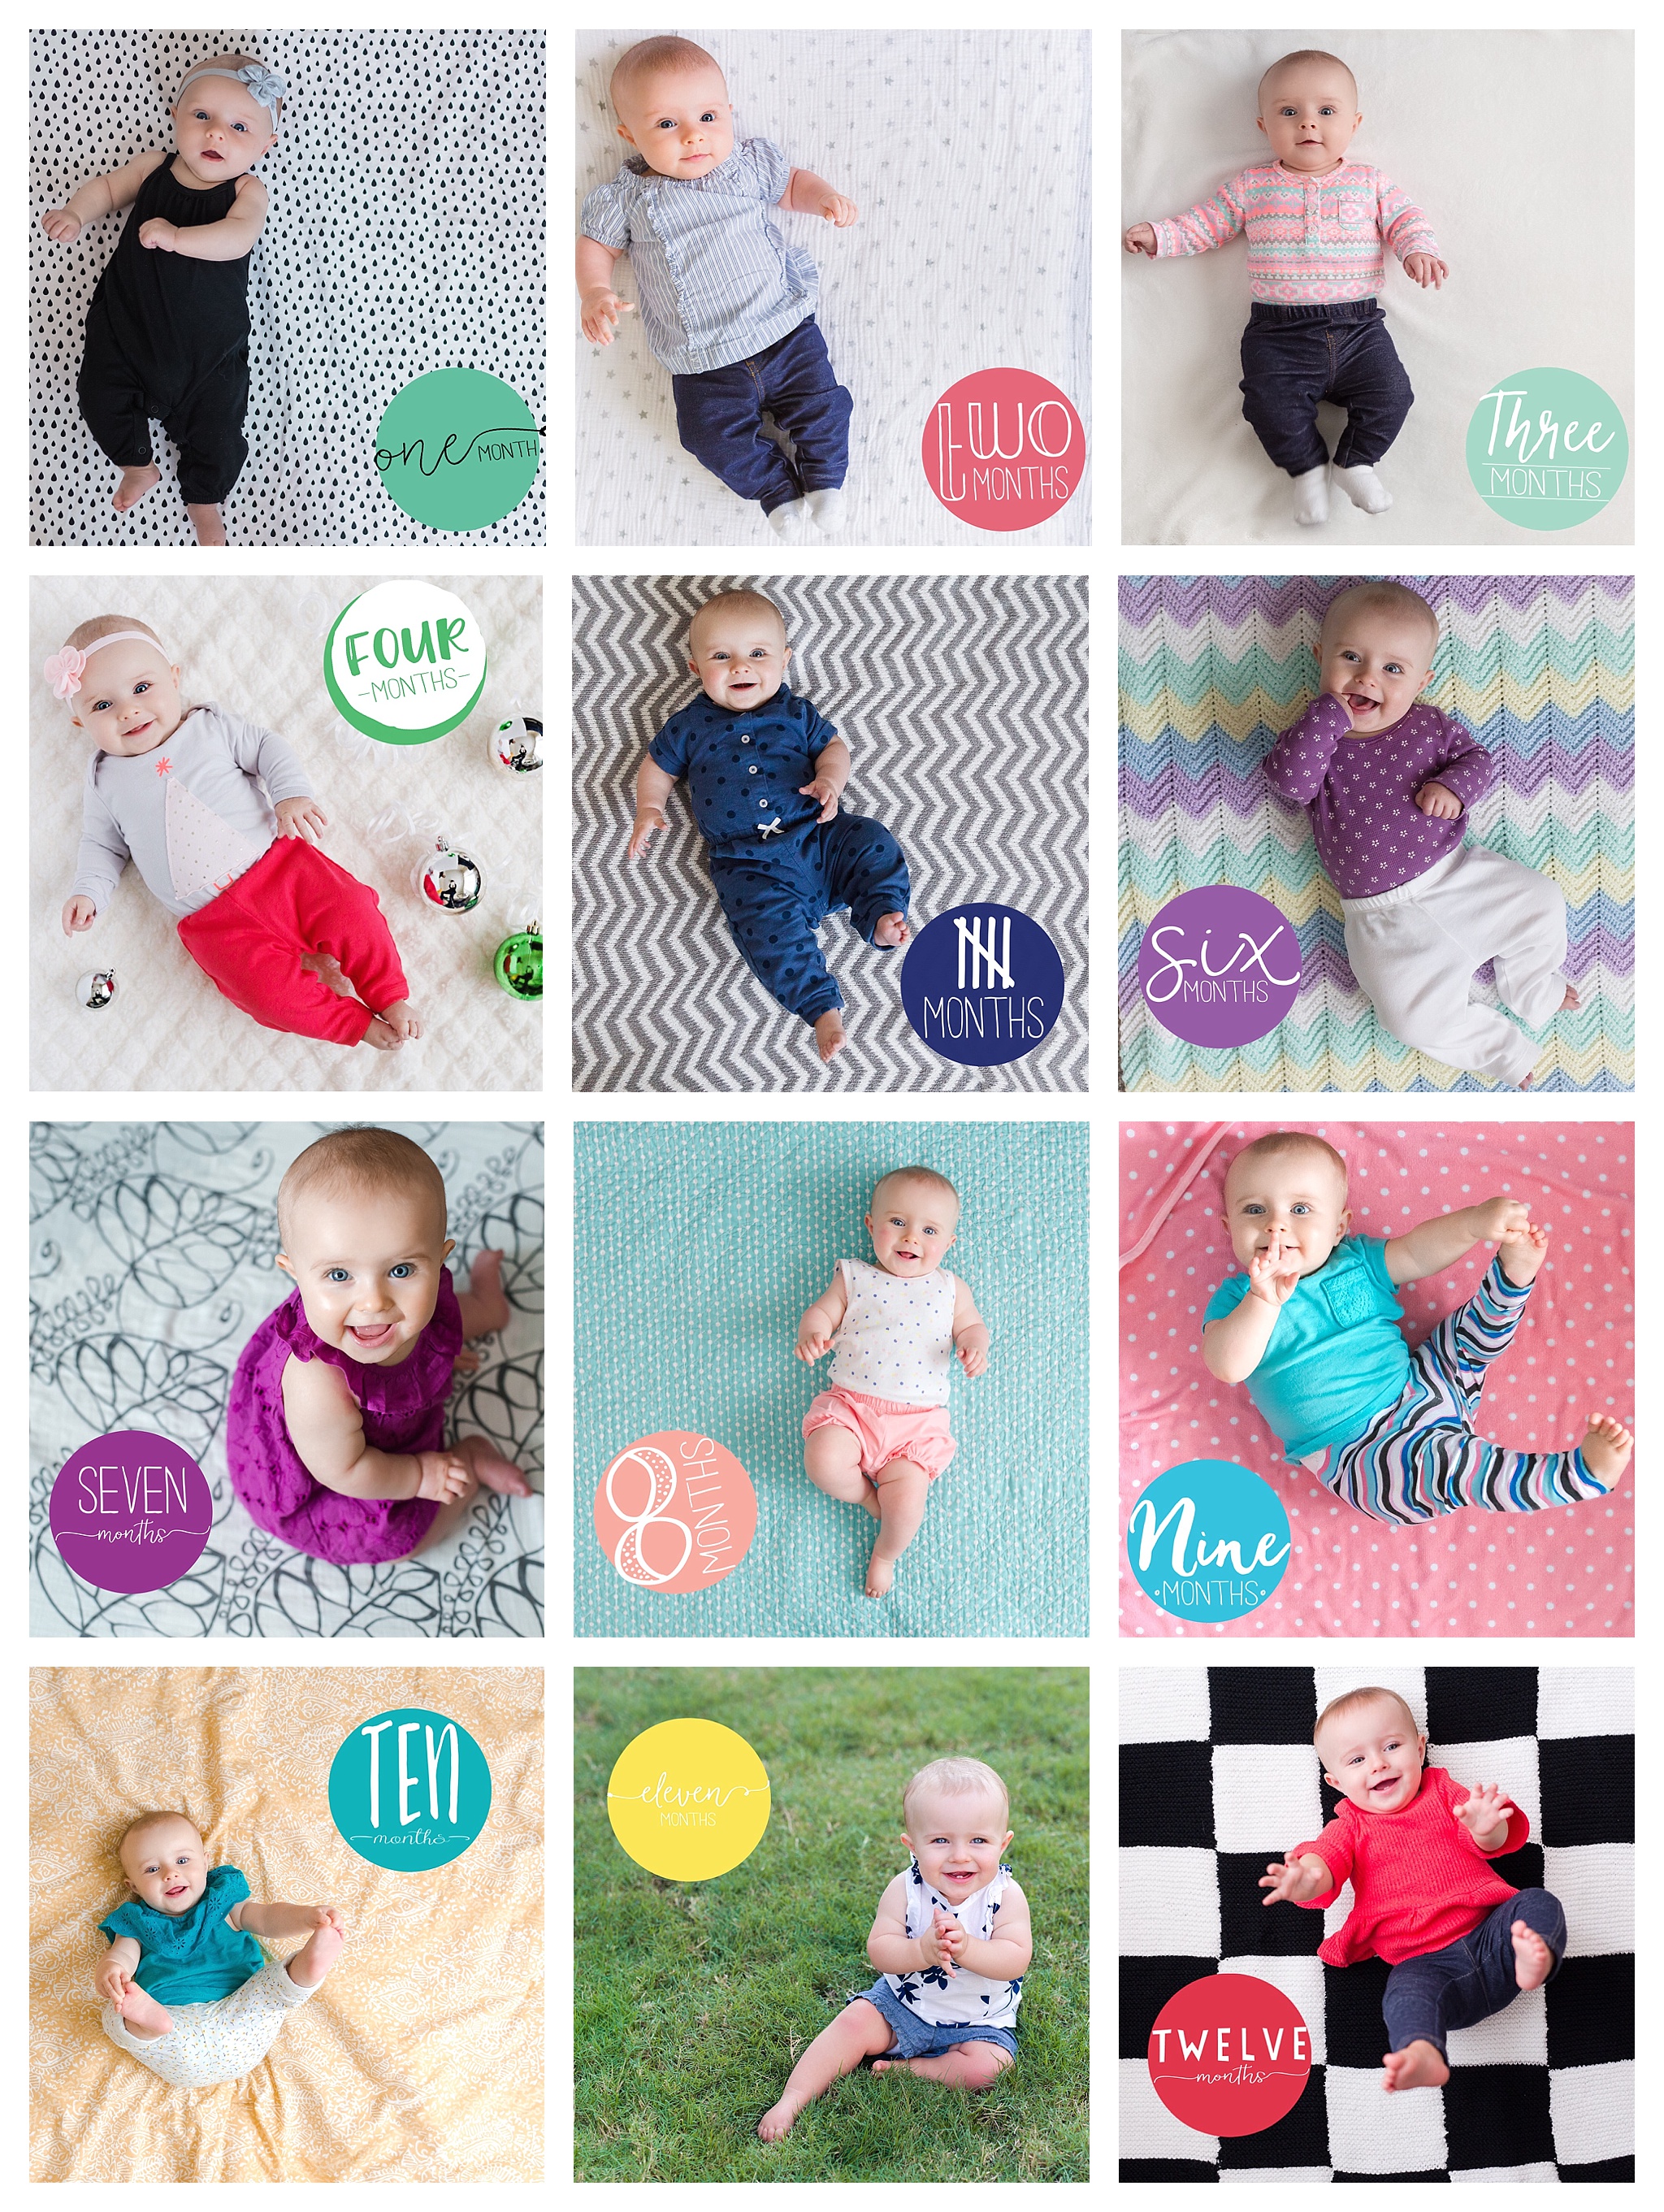 THE GLISS NEST - GREENVILLE FAMILY BLOG— Making Monthly Baby Photos Fun